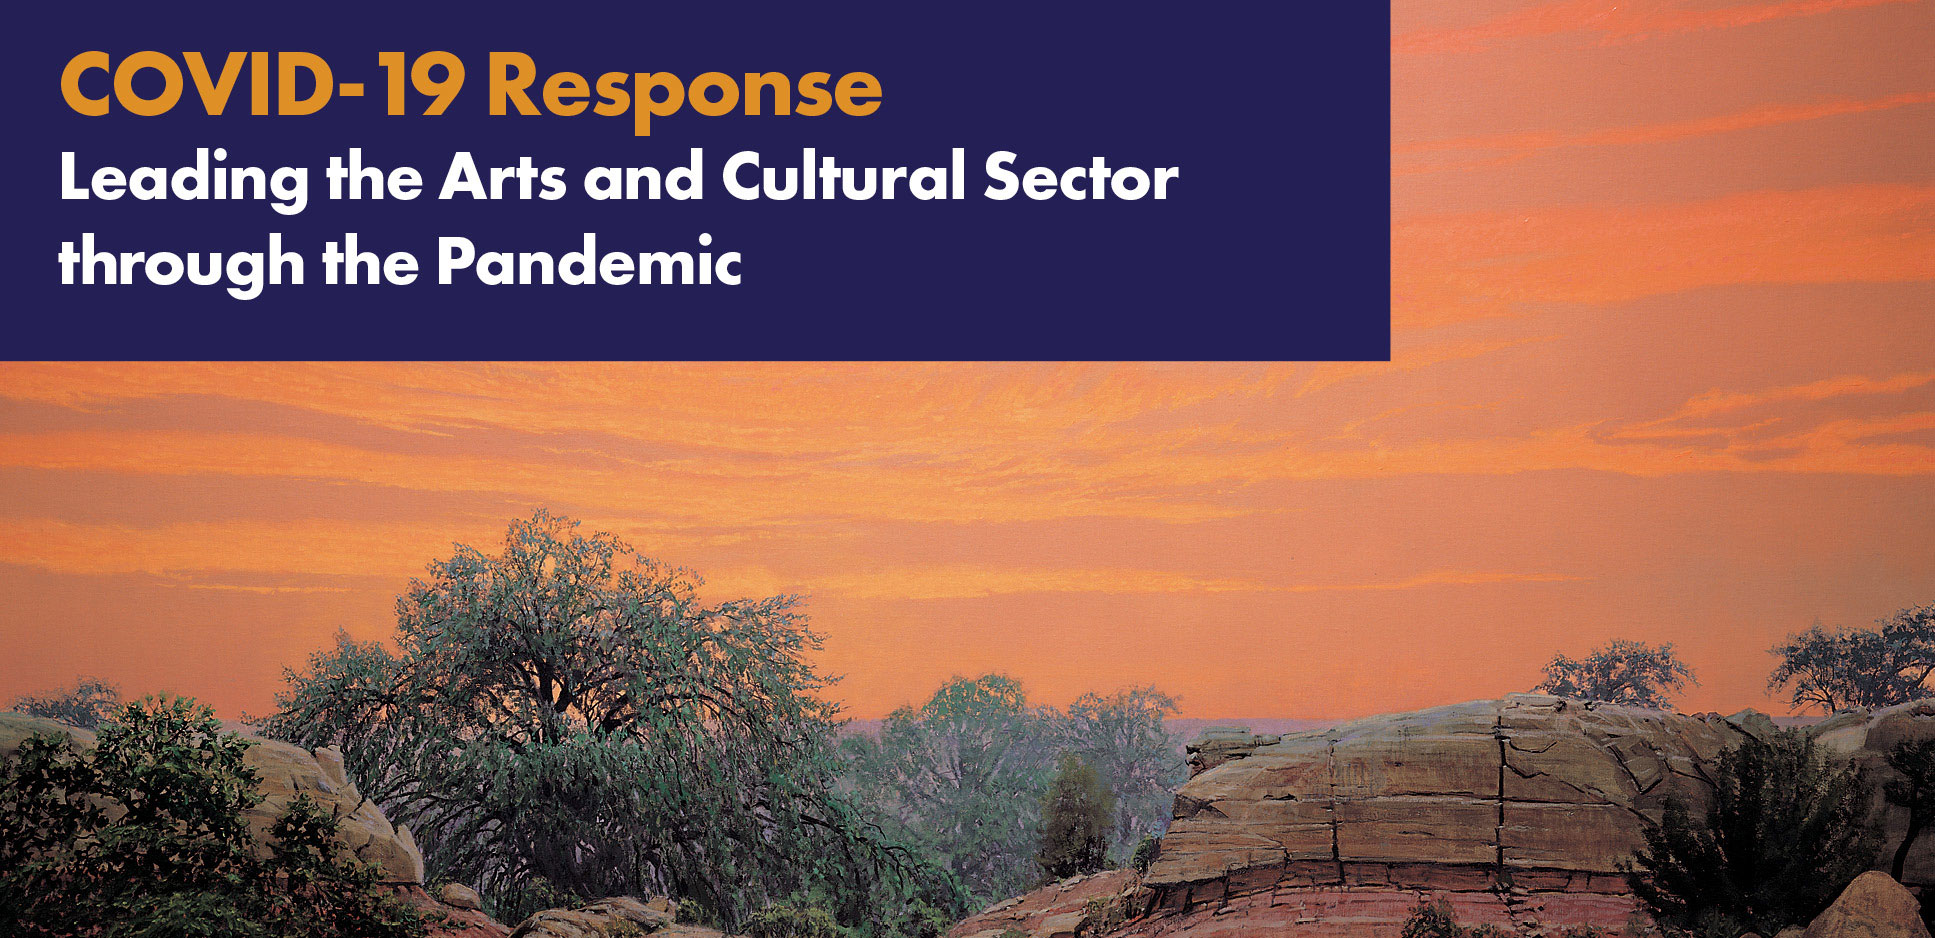 COVID-19 Response: Leading the Arts and Cultural Sector through the Pandemic